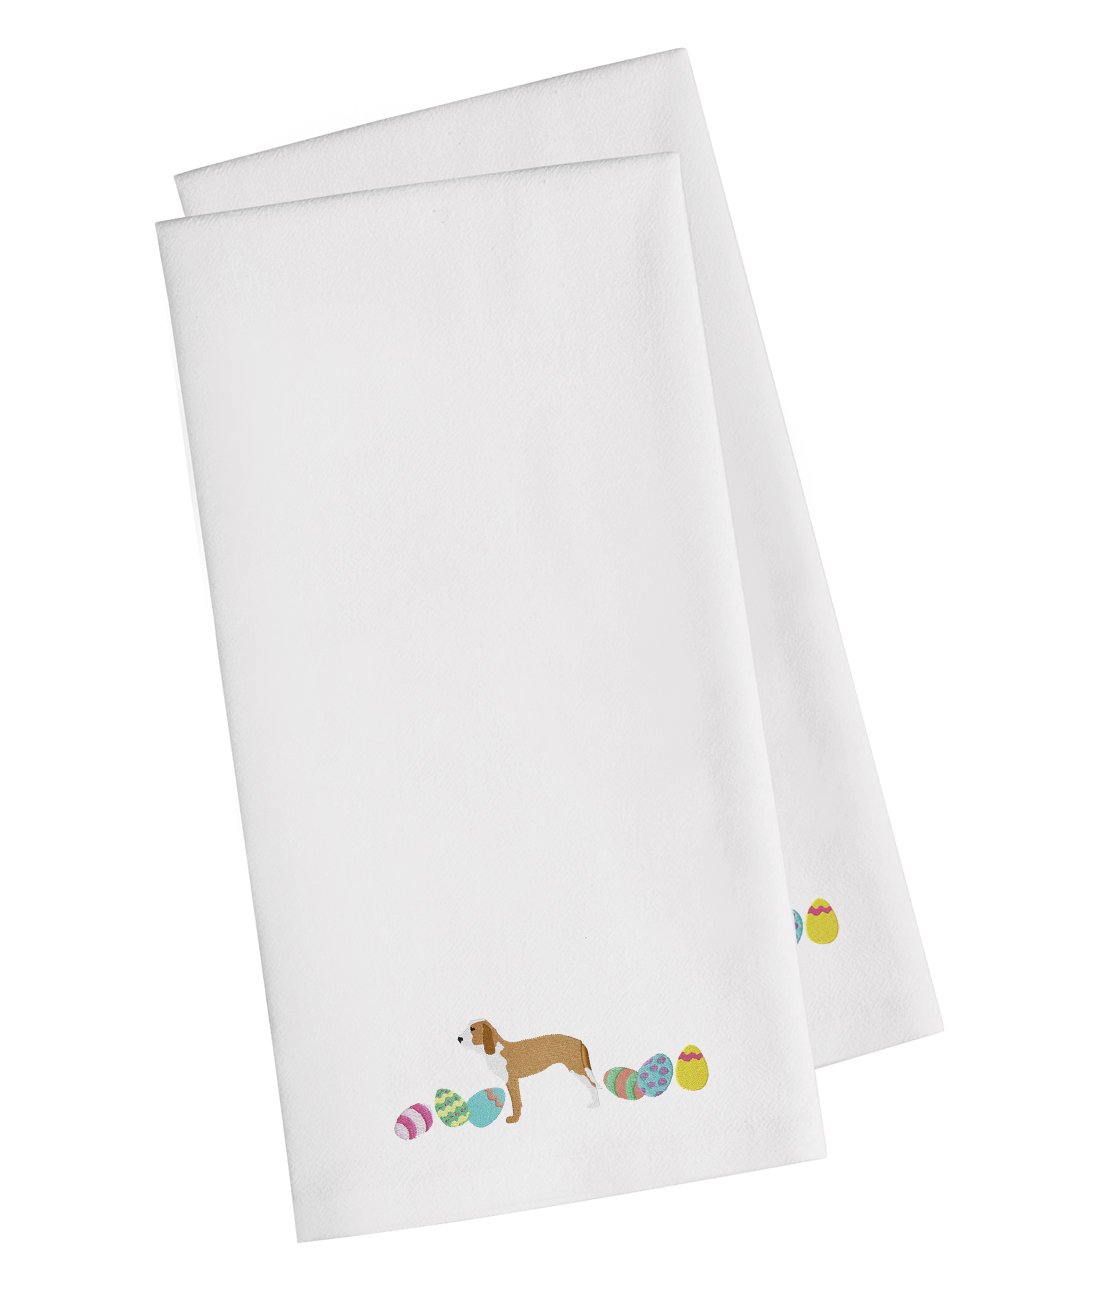 Sabueso Espanol Easter White Embroidered Kitchen Towel Set of 2 CK1688WHTWE by Caroline's Treasures